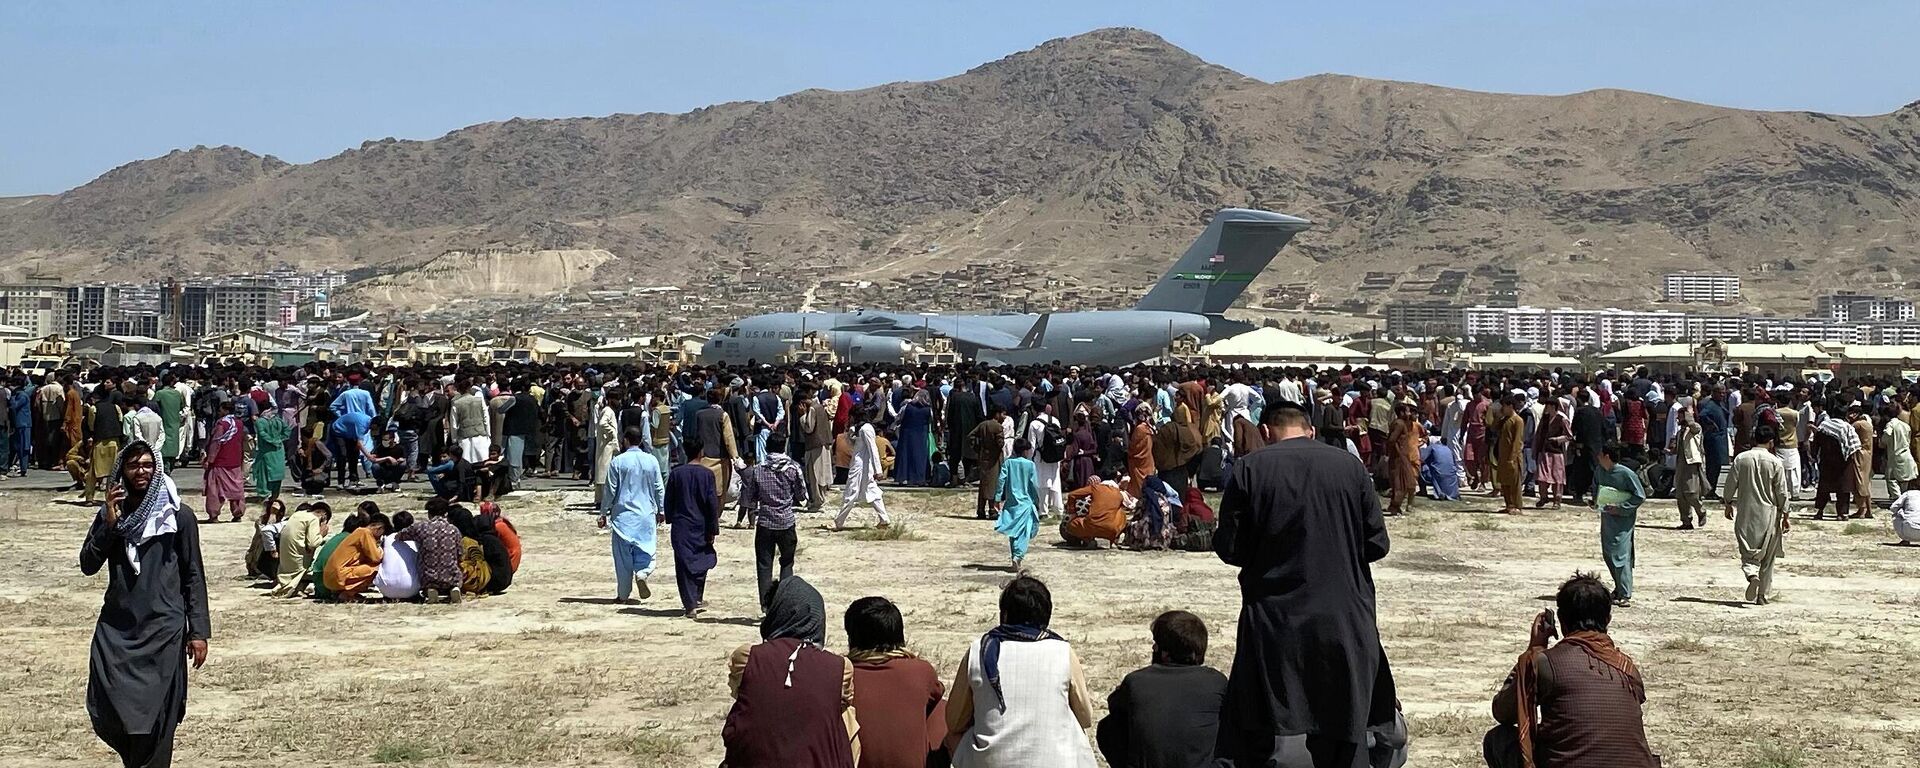  In this Aug. 16, 2021, file photo, hundreds of people gather near a U.S. Air Force C-17 transport plane at the perimeter of the international airport in Kabul, Afghanistan. Ordinary Americans and the nation's airlines are combining to donate miles and cash to help Afghan refugees resettle in the United States. Organizers said Tuesday, Oct. 26, they have raised enough donations pay for 40,000 flights, but they're hoping to nearly double that amount.  - Sputnik International, 1920, 31.08.2022